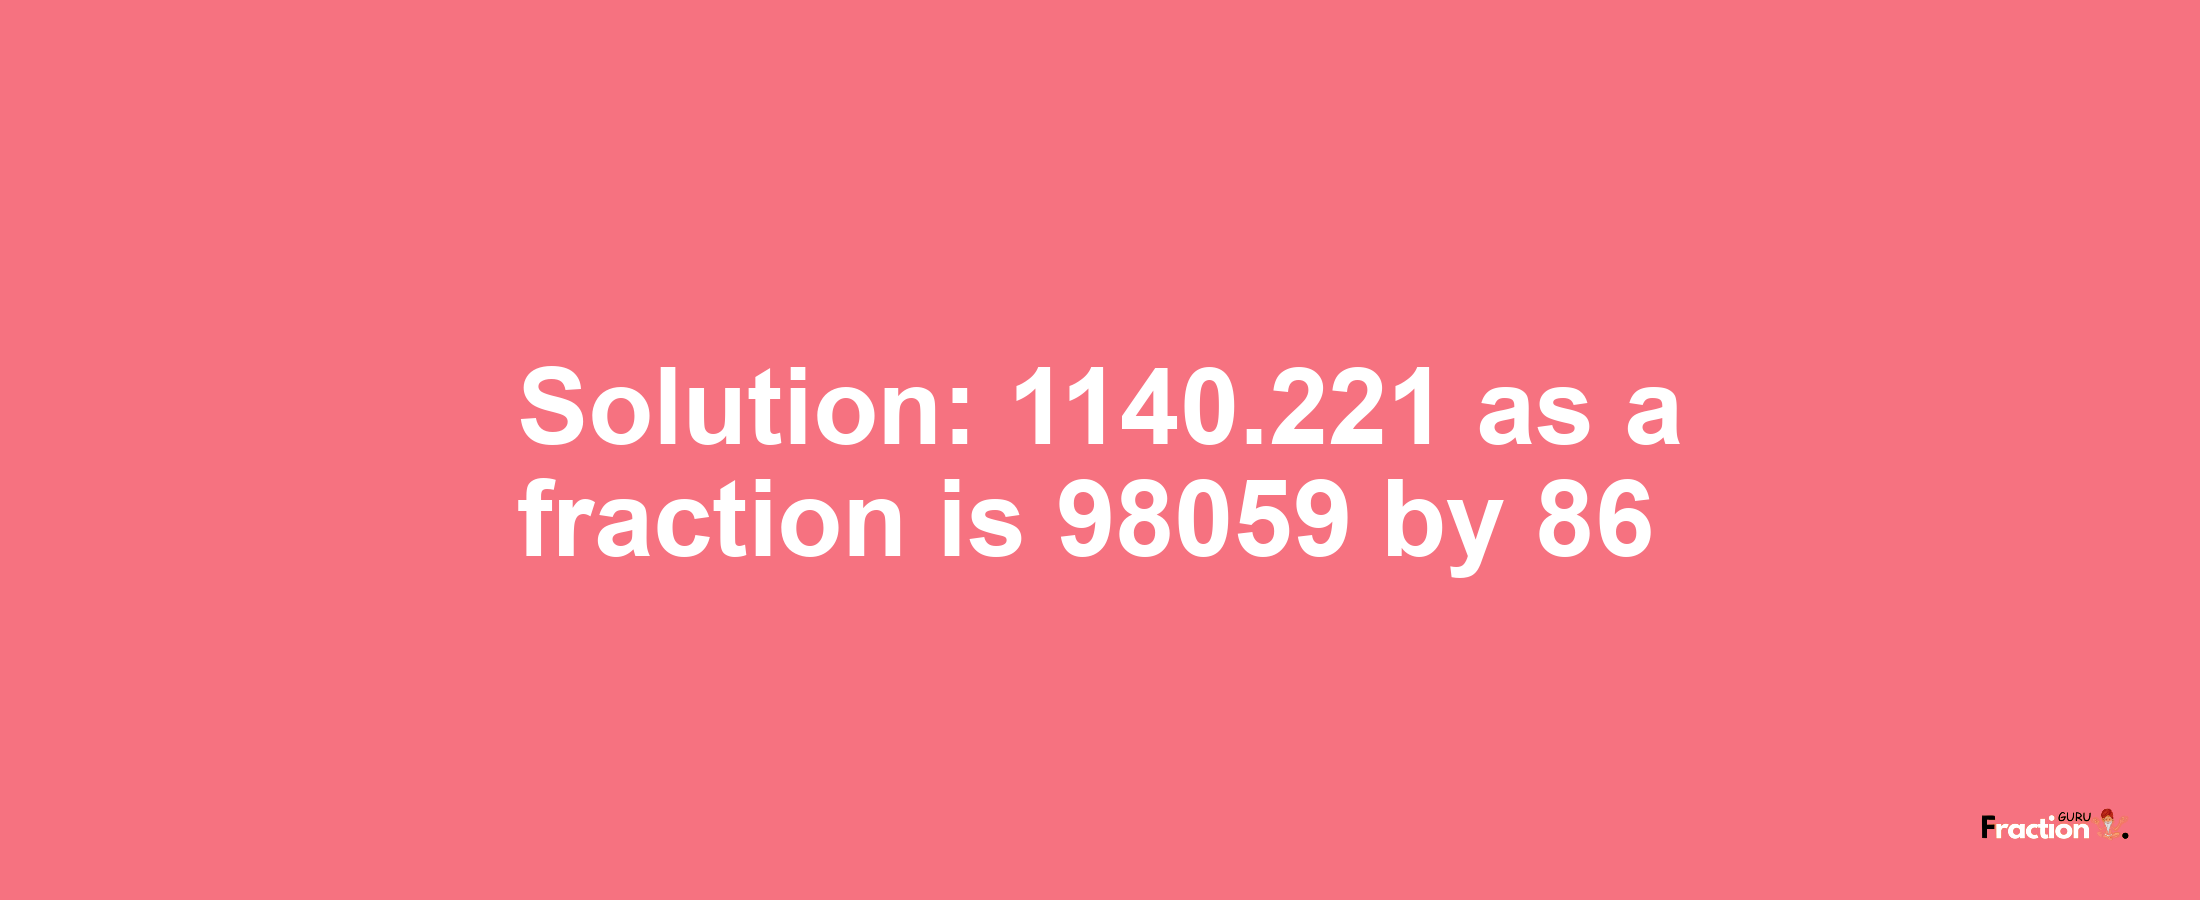 Solution:1140.221 as a fraction is 98059/86